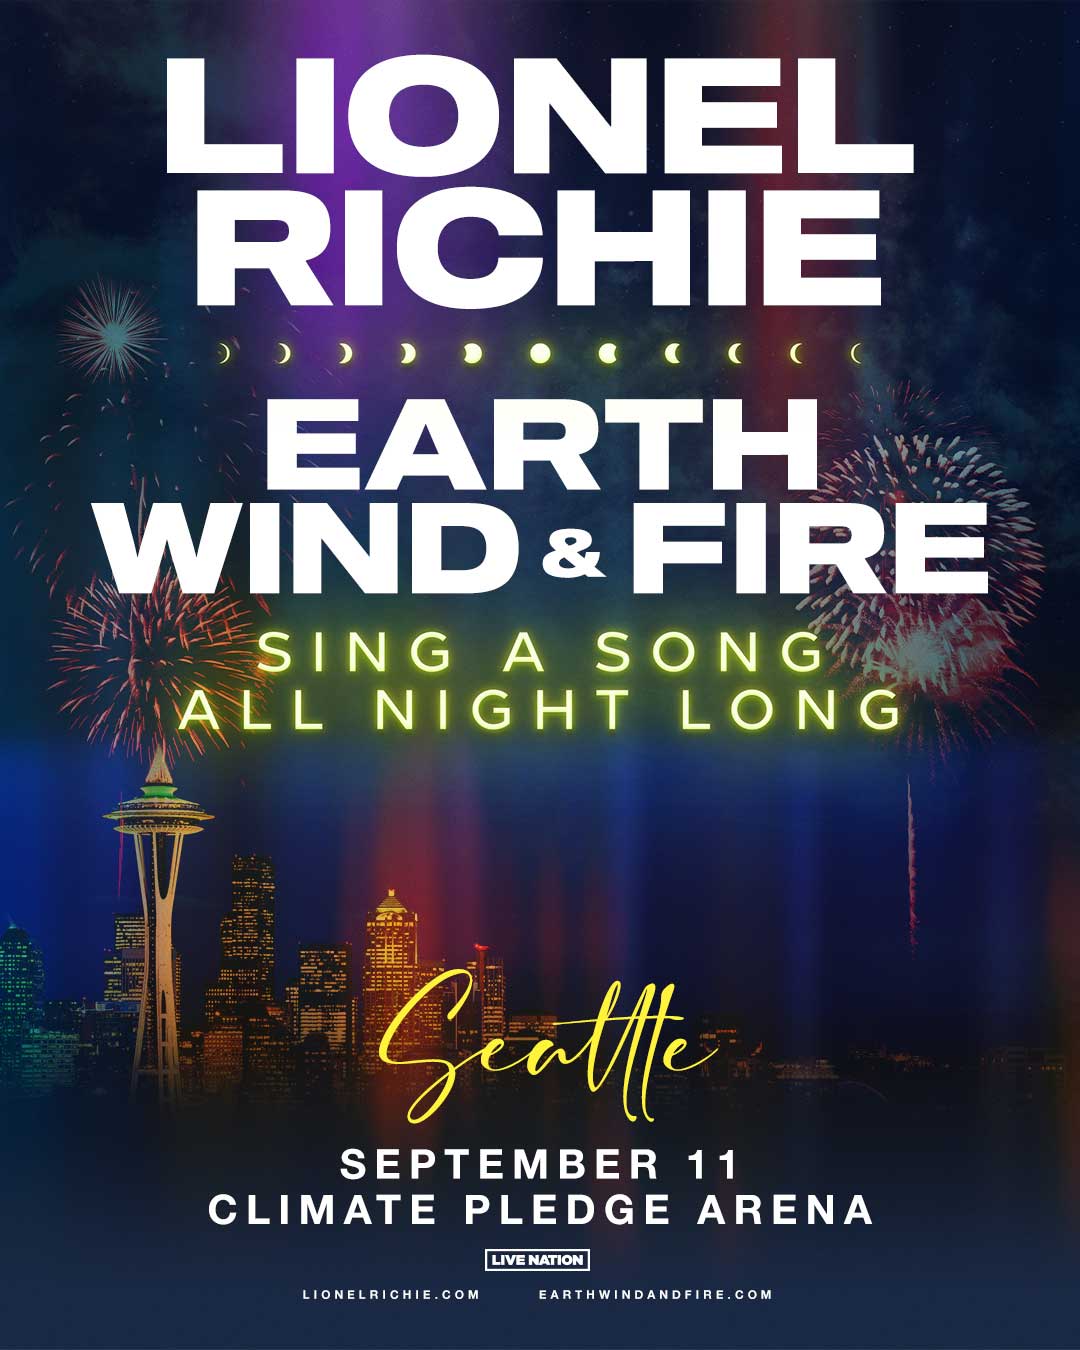 In Concert for Cancer Backstage featuring Lionel Richie and Earth, Wind & Fire